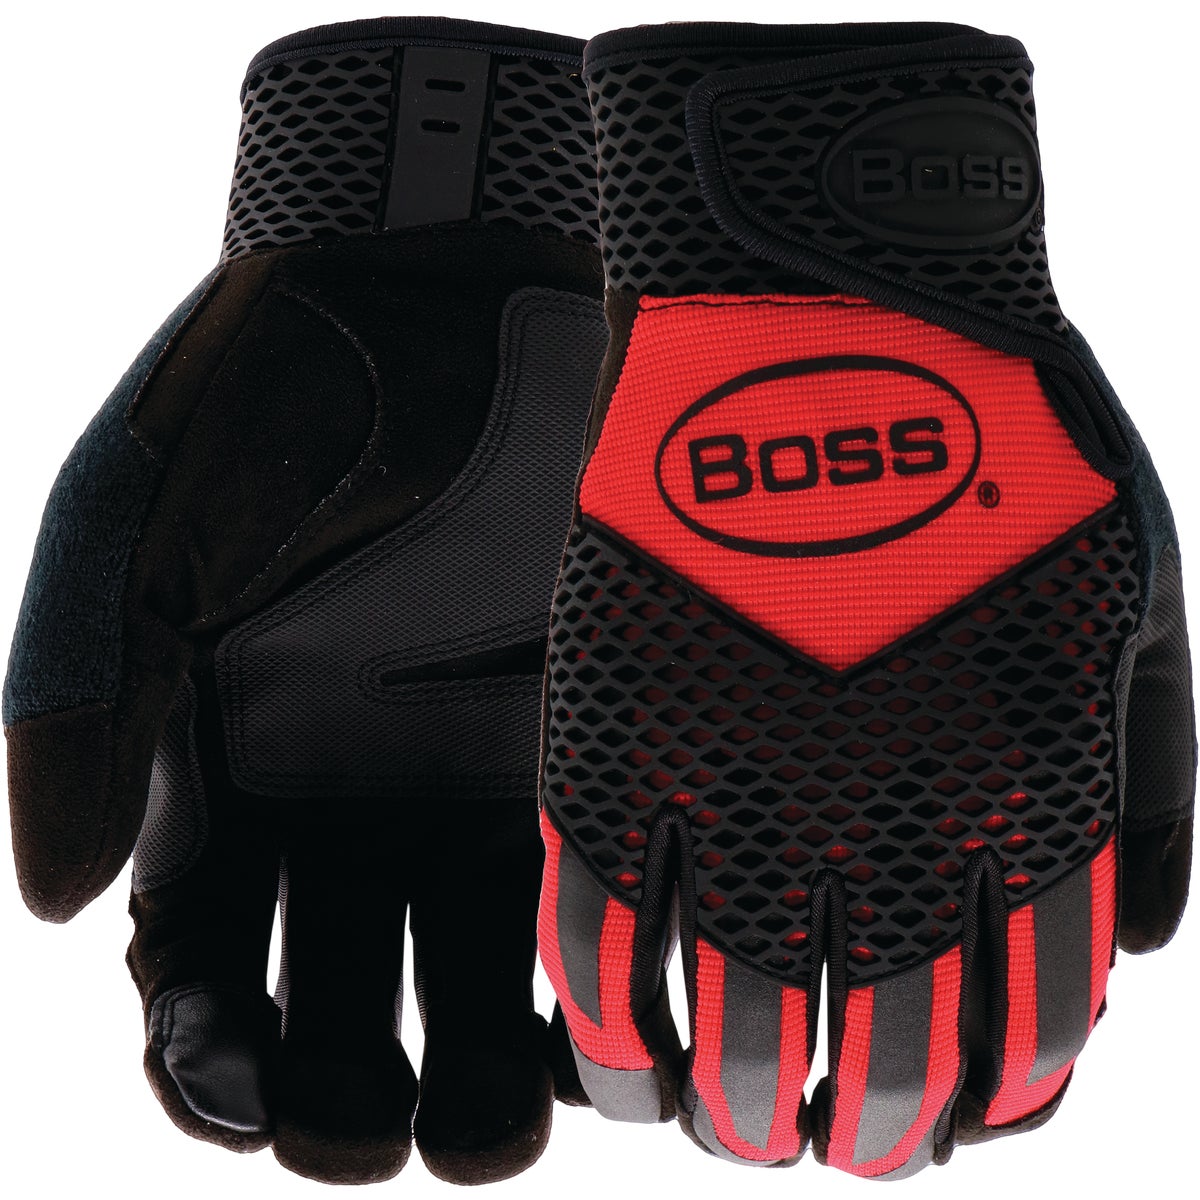 Item 733561, Performance work glove featuring honeycomb TPR over knuckles.